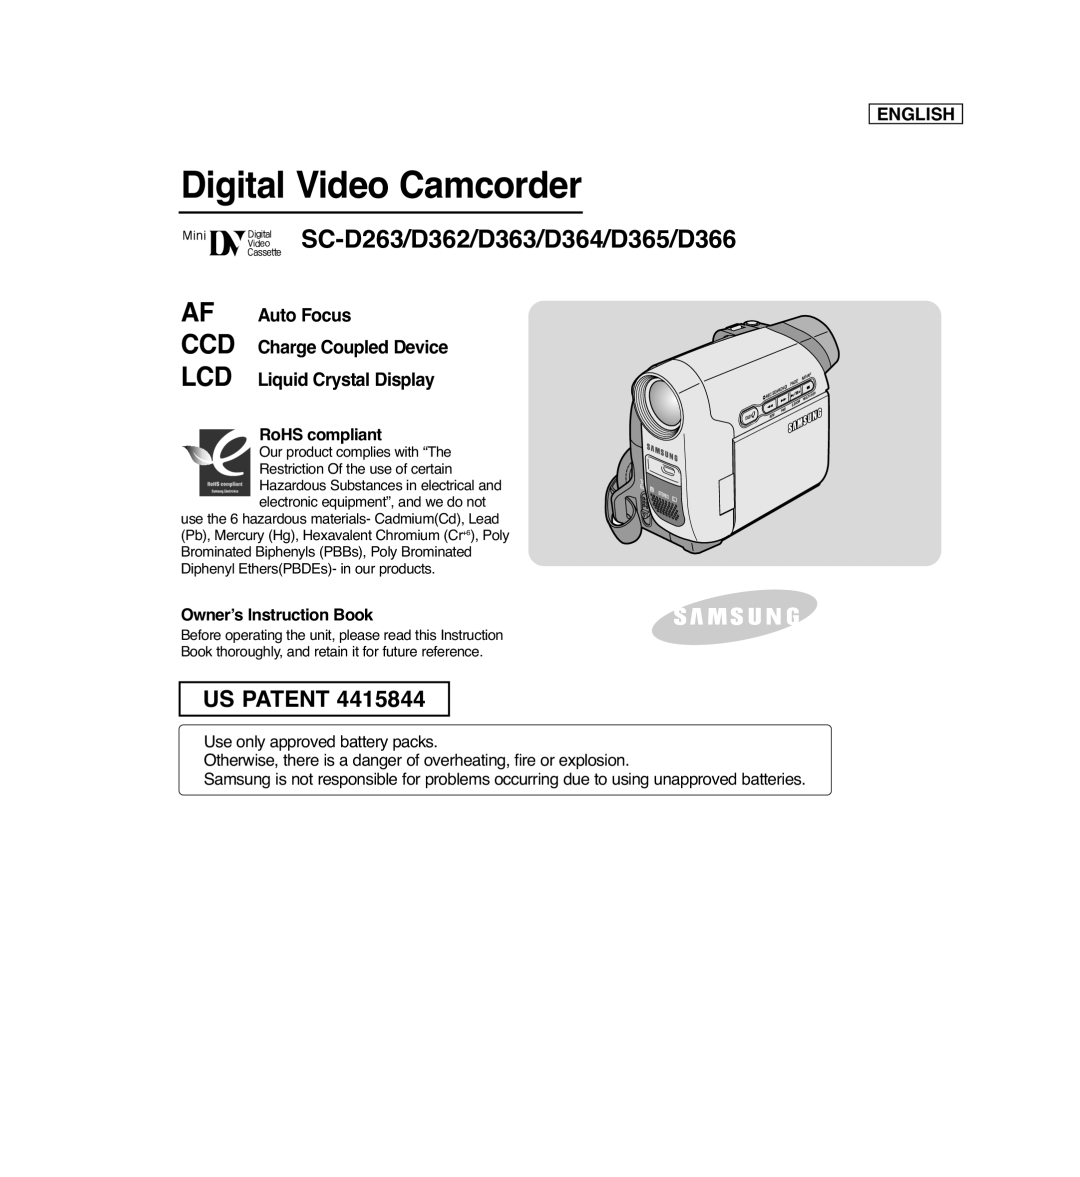 Samsung SC-D366, SC-D364, SC-D362 manual SC-D263/D362/D363/D364/D365/D366, Af Ccd Lcd, Us Patent, English, RoHS compliant 